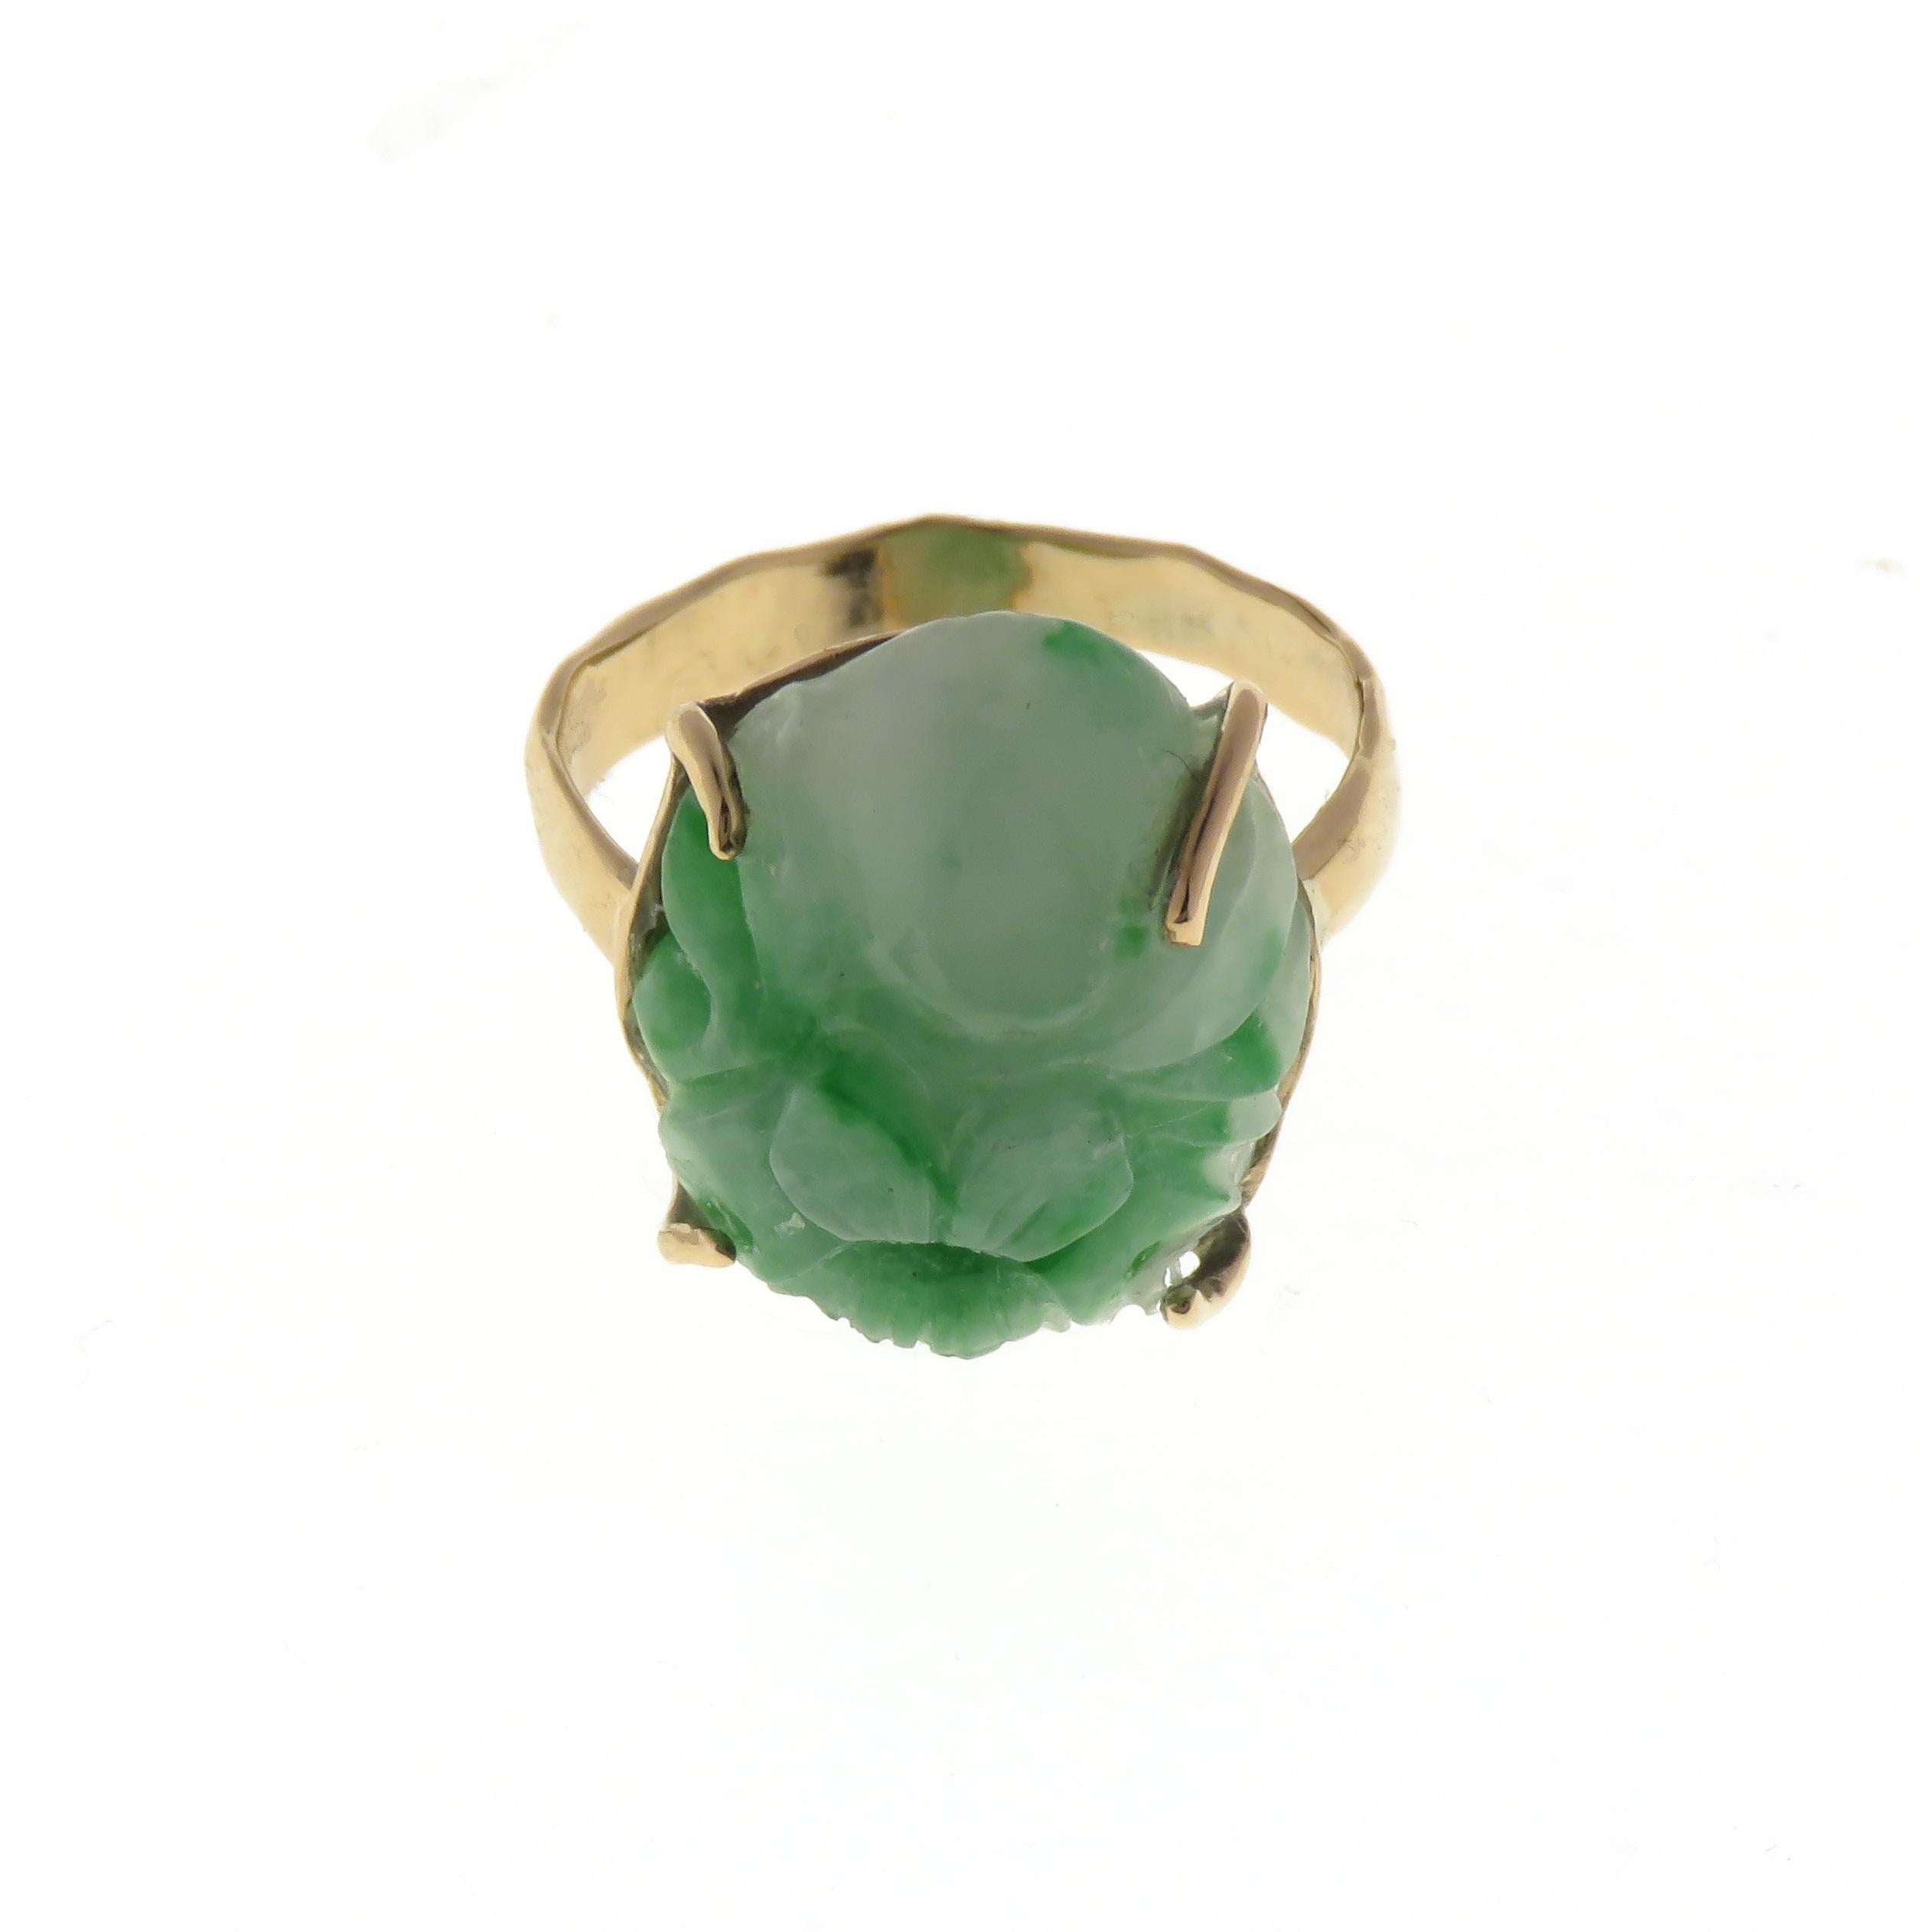 Contemporary 9 karat rose gold ring with untreated natural green jade. The cabochon encarved cut makes particularly attractive this natural jade and the stem is finished in hammered gold giving the profile a bit of gleam. The size of the gemstone is